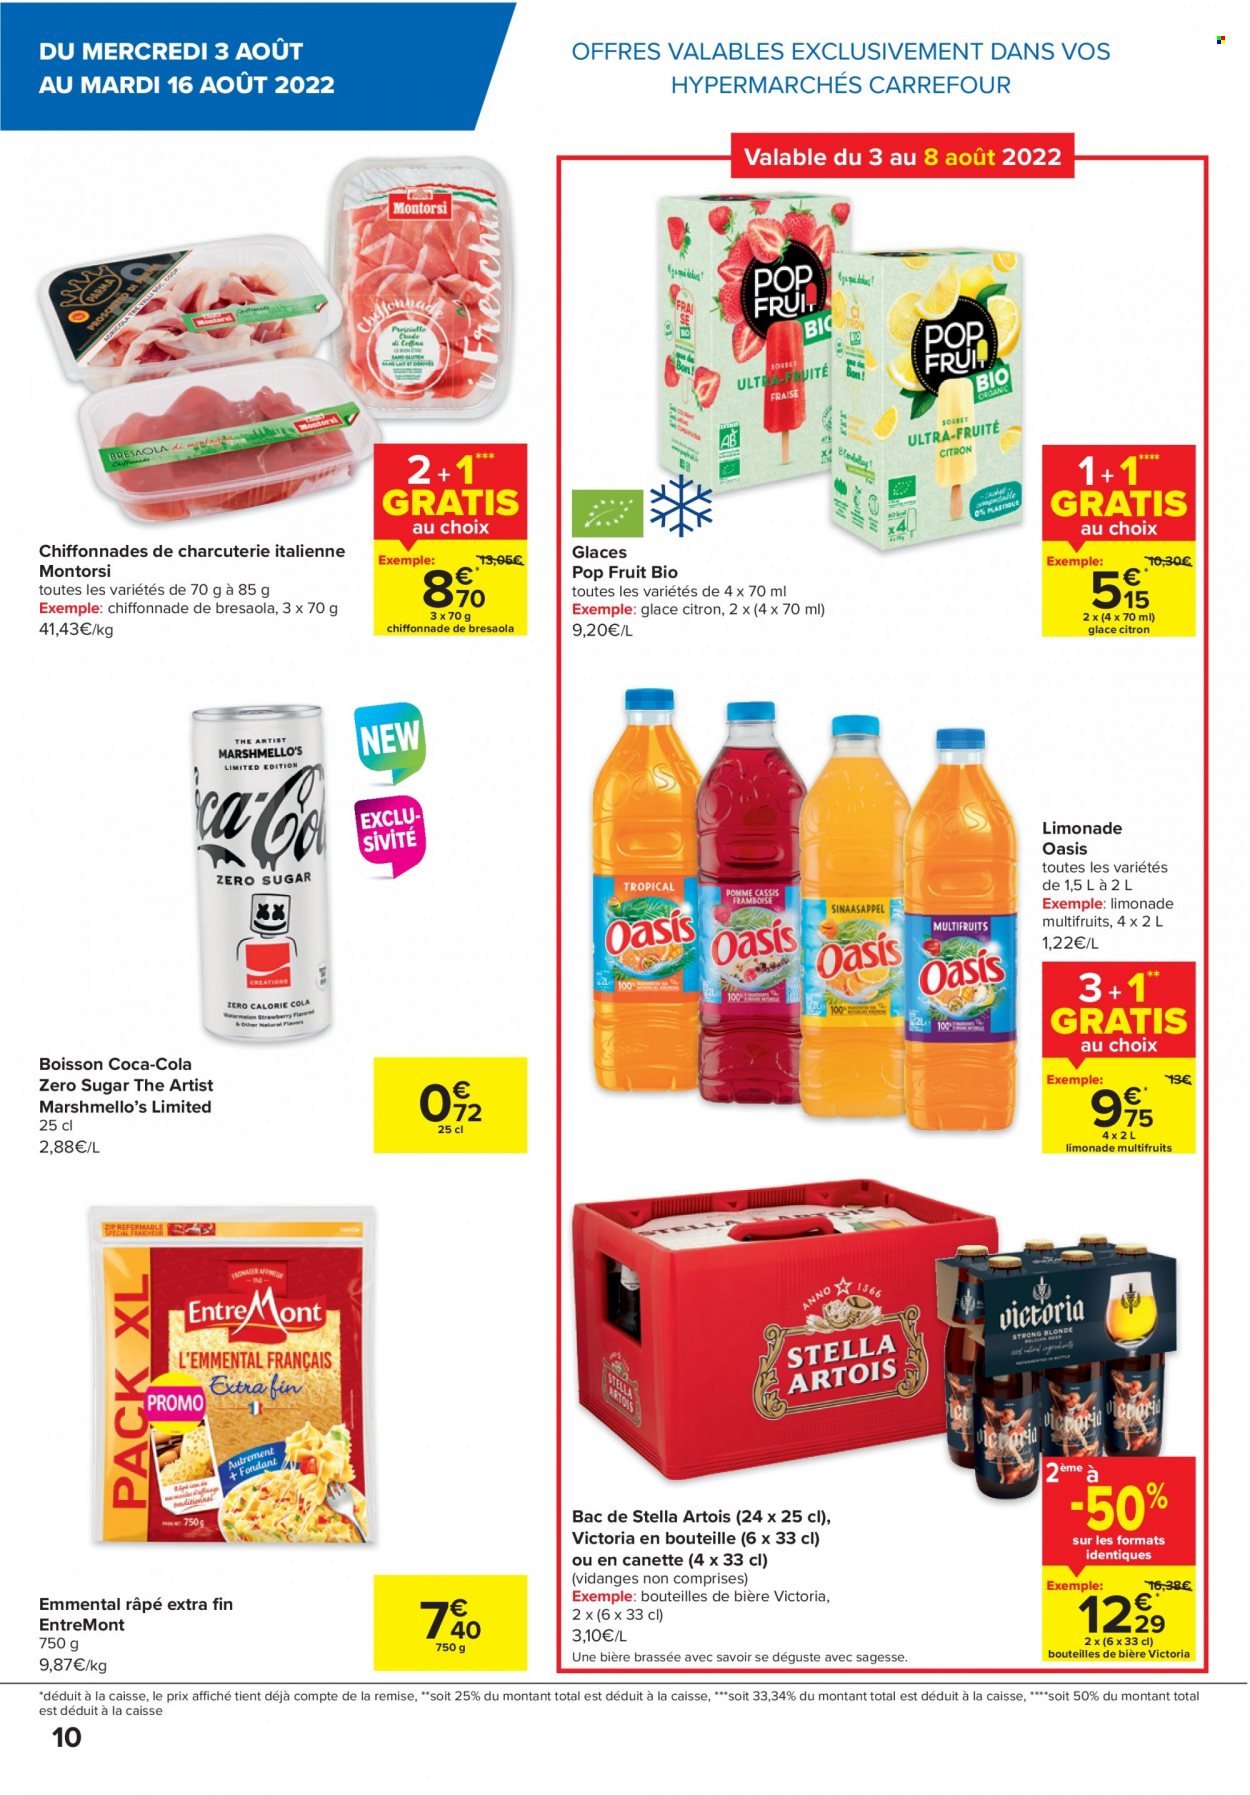 Catalogue Carrefour hypermarkt - 3.8.2022 - 16.8.2022. Page 10.